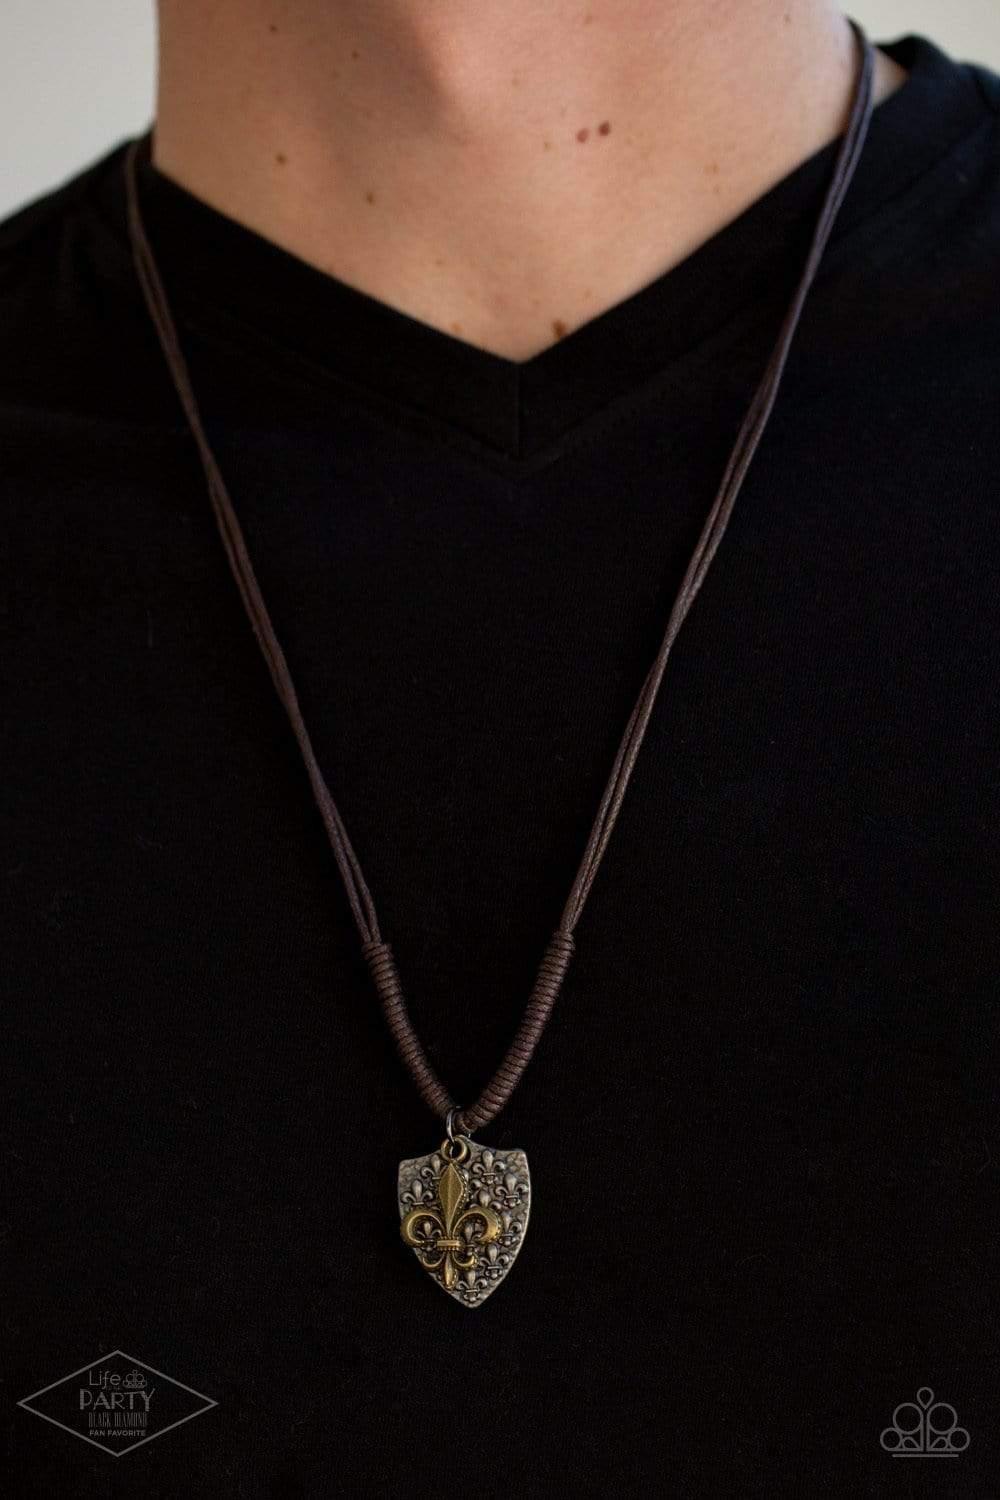 Paparazzi Accessories Shielded Simplicity - Brass An antiqued silver shield-shaped pendant embossed with a repeating fleur-de-lis pattern is paired with a brass fleur-de-lis charm at the bottom of doubled strands of brown cording. Sliding knots allow for